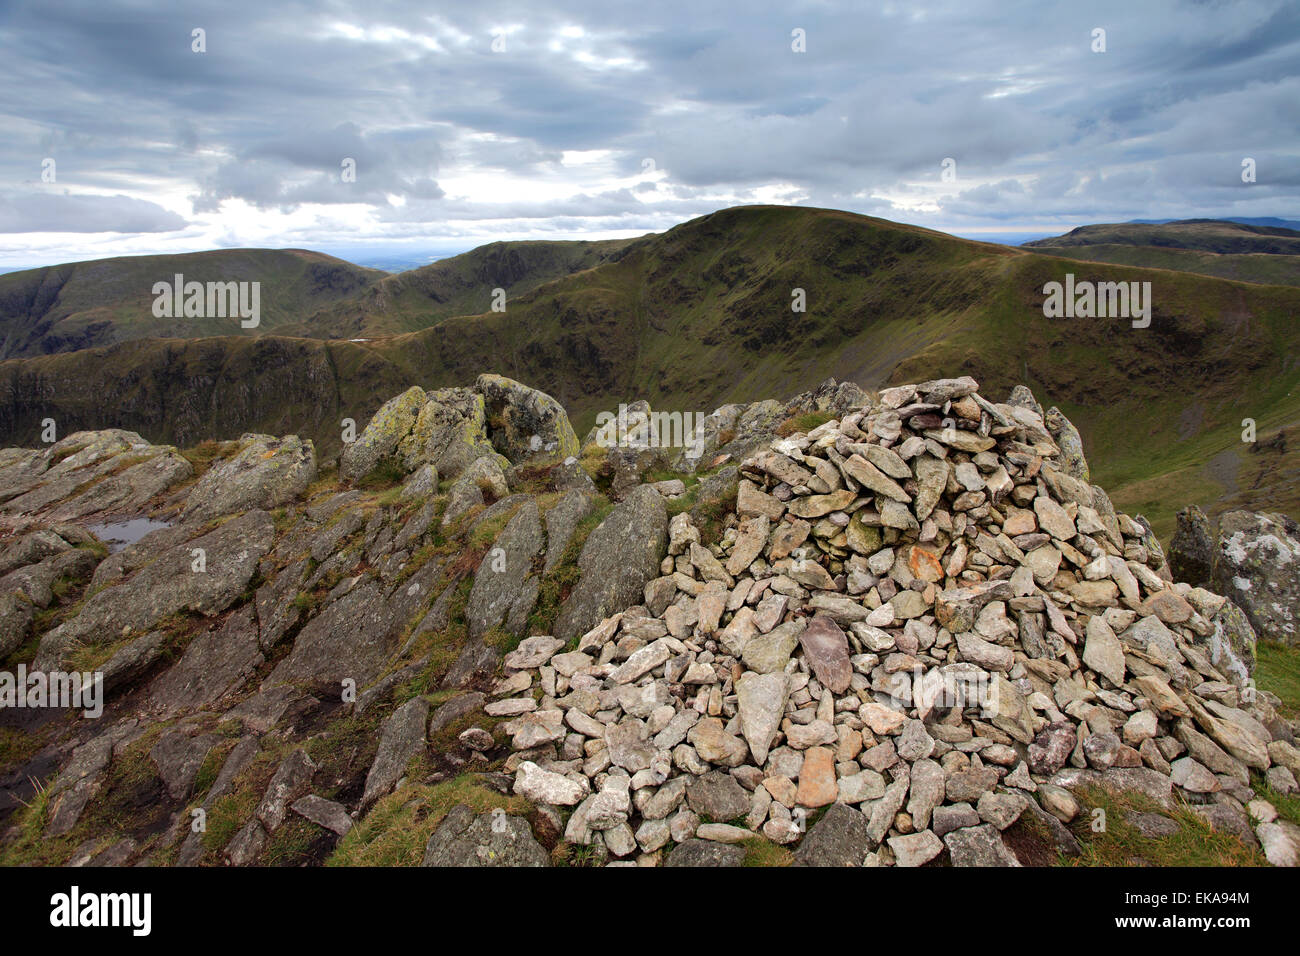 View over the summit of Kidsty Pike fell, Lake District National Park, Cumbria County, England, UK. Stock Photo